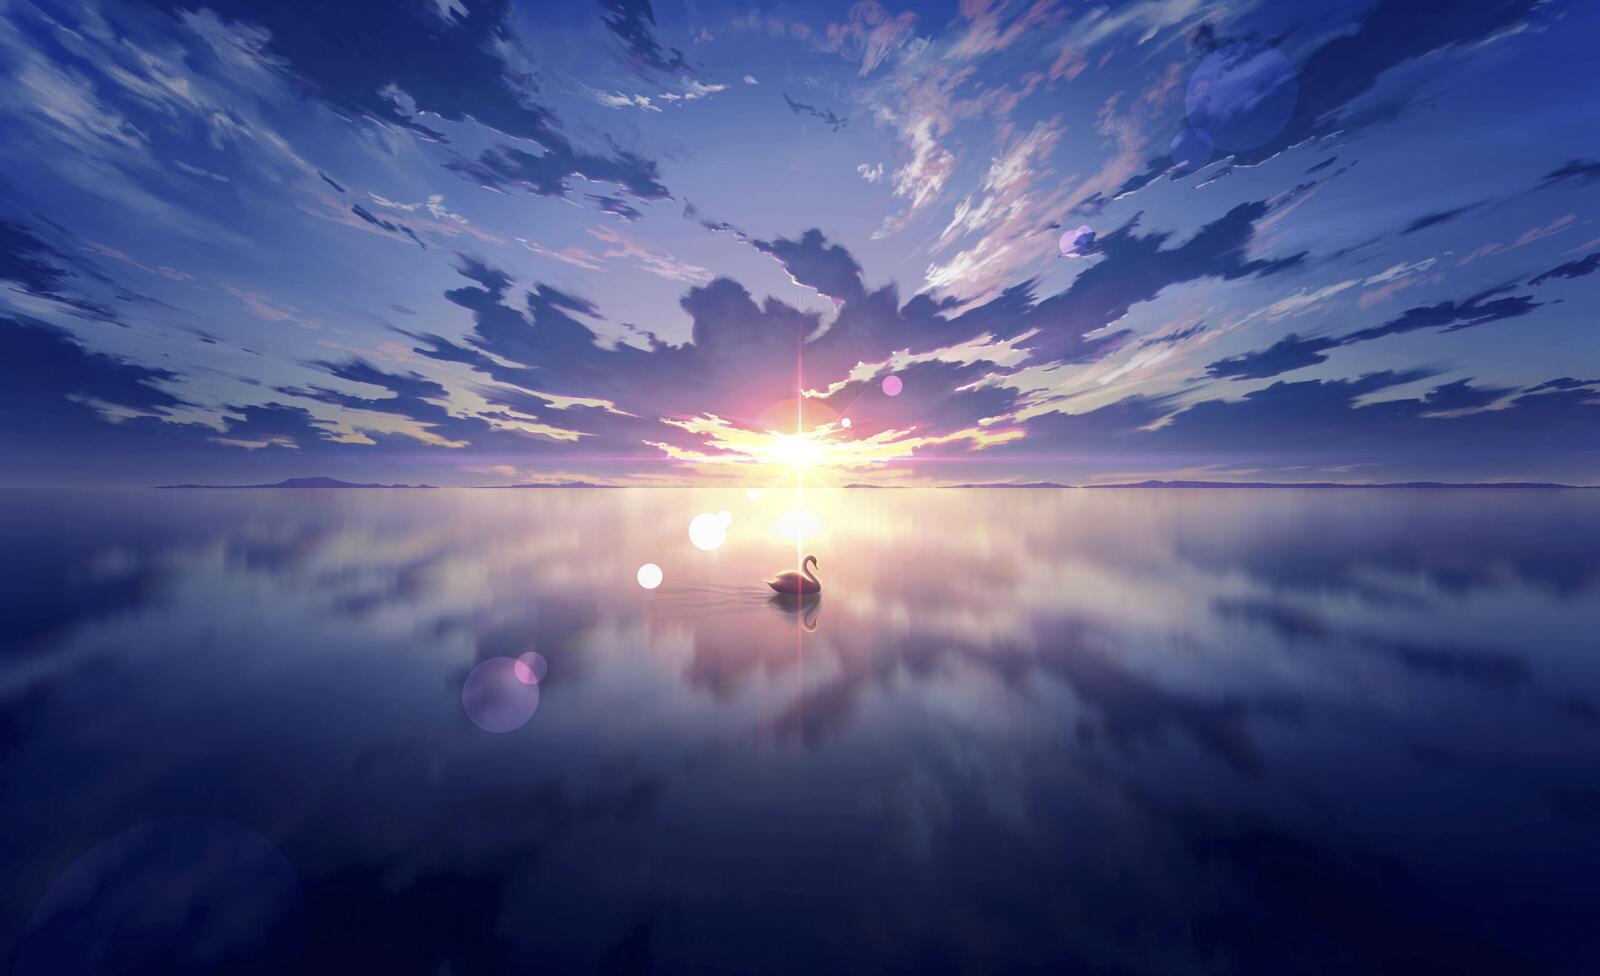 Wallpapers wallpaper anime landscape behind the clouds sunset on the desktop